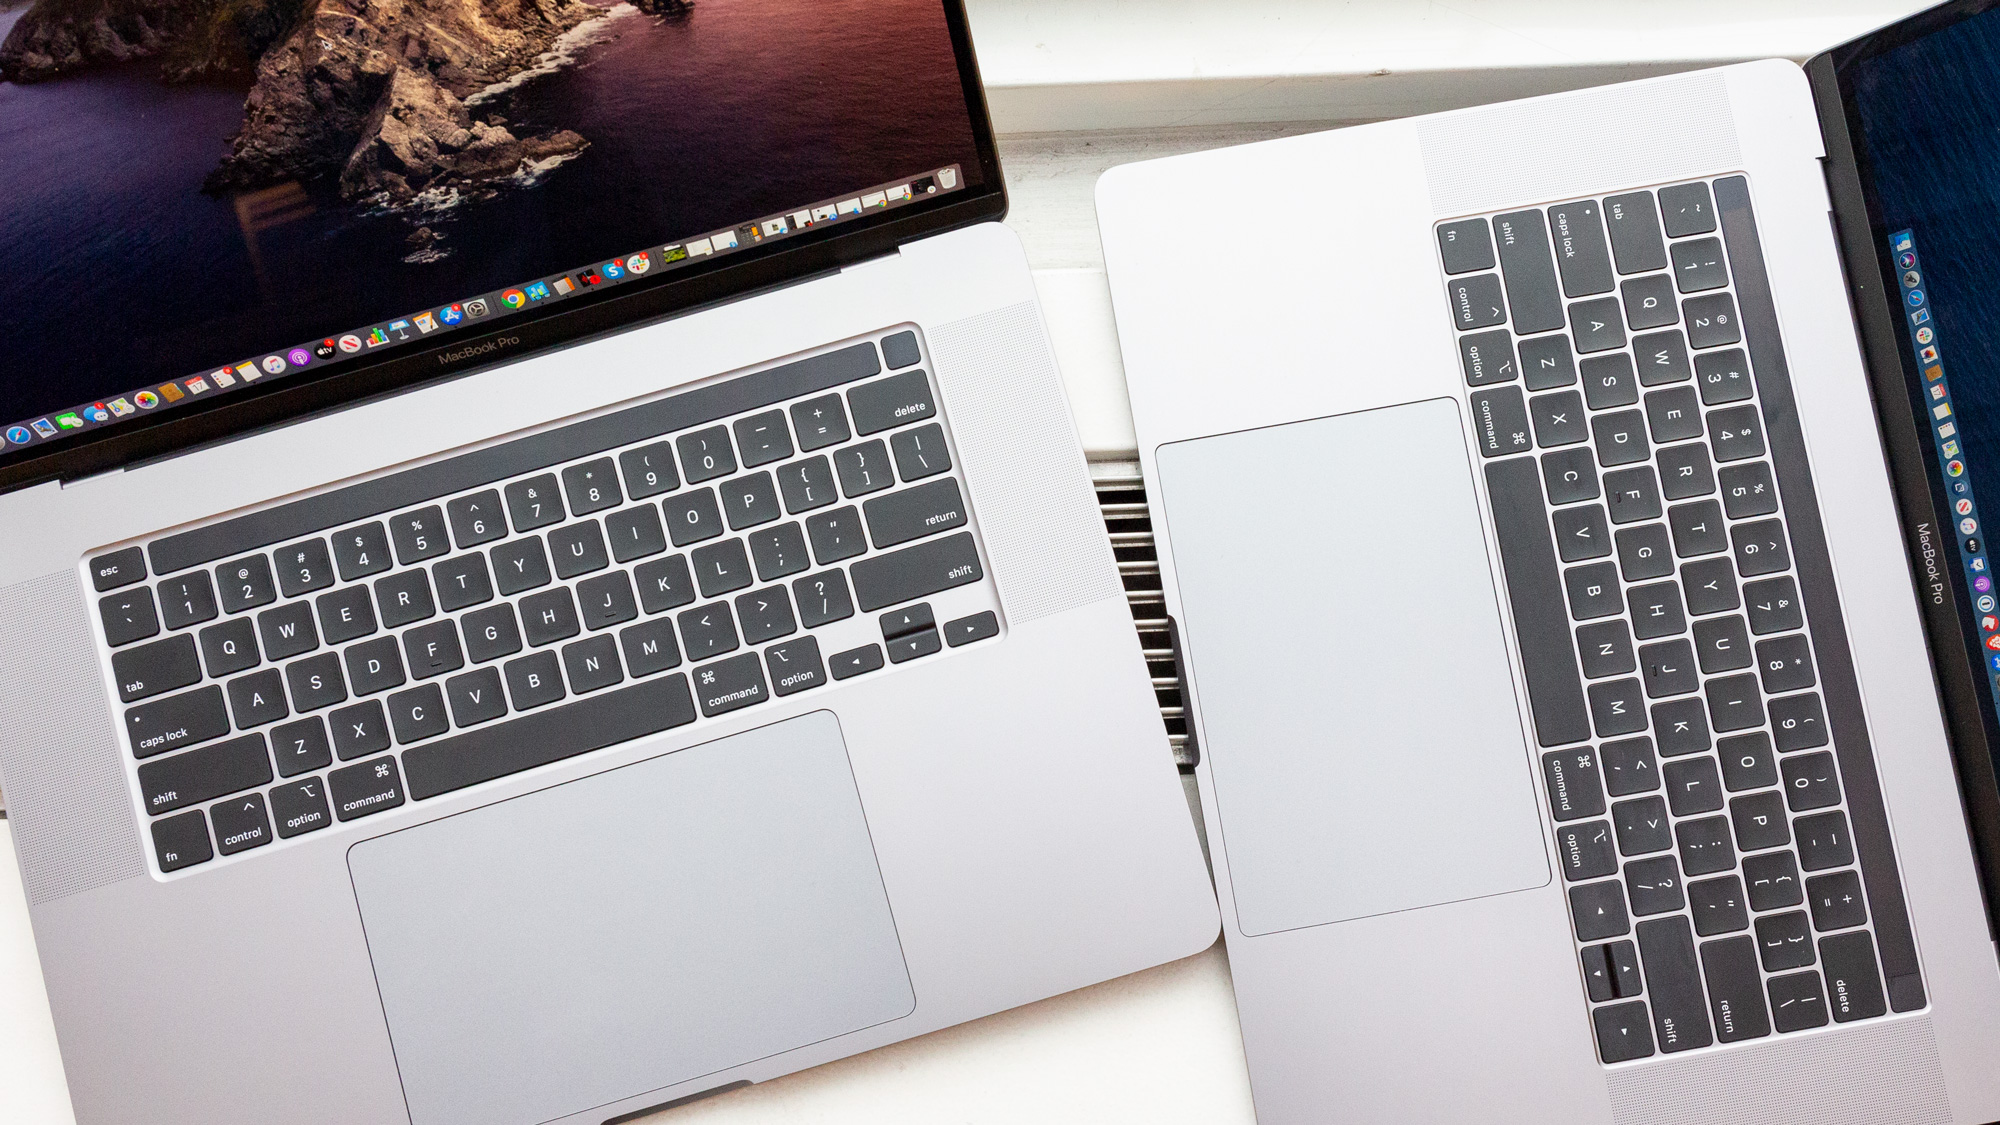 Macbook Pro Macbook Air 2020 Models Launching In Q2 With Better Keyboards Report Laptop Mag